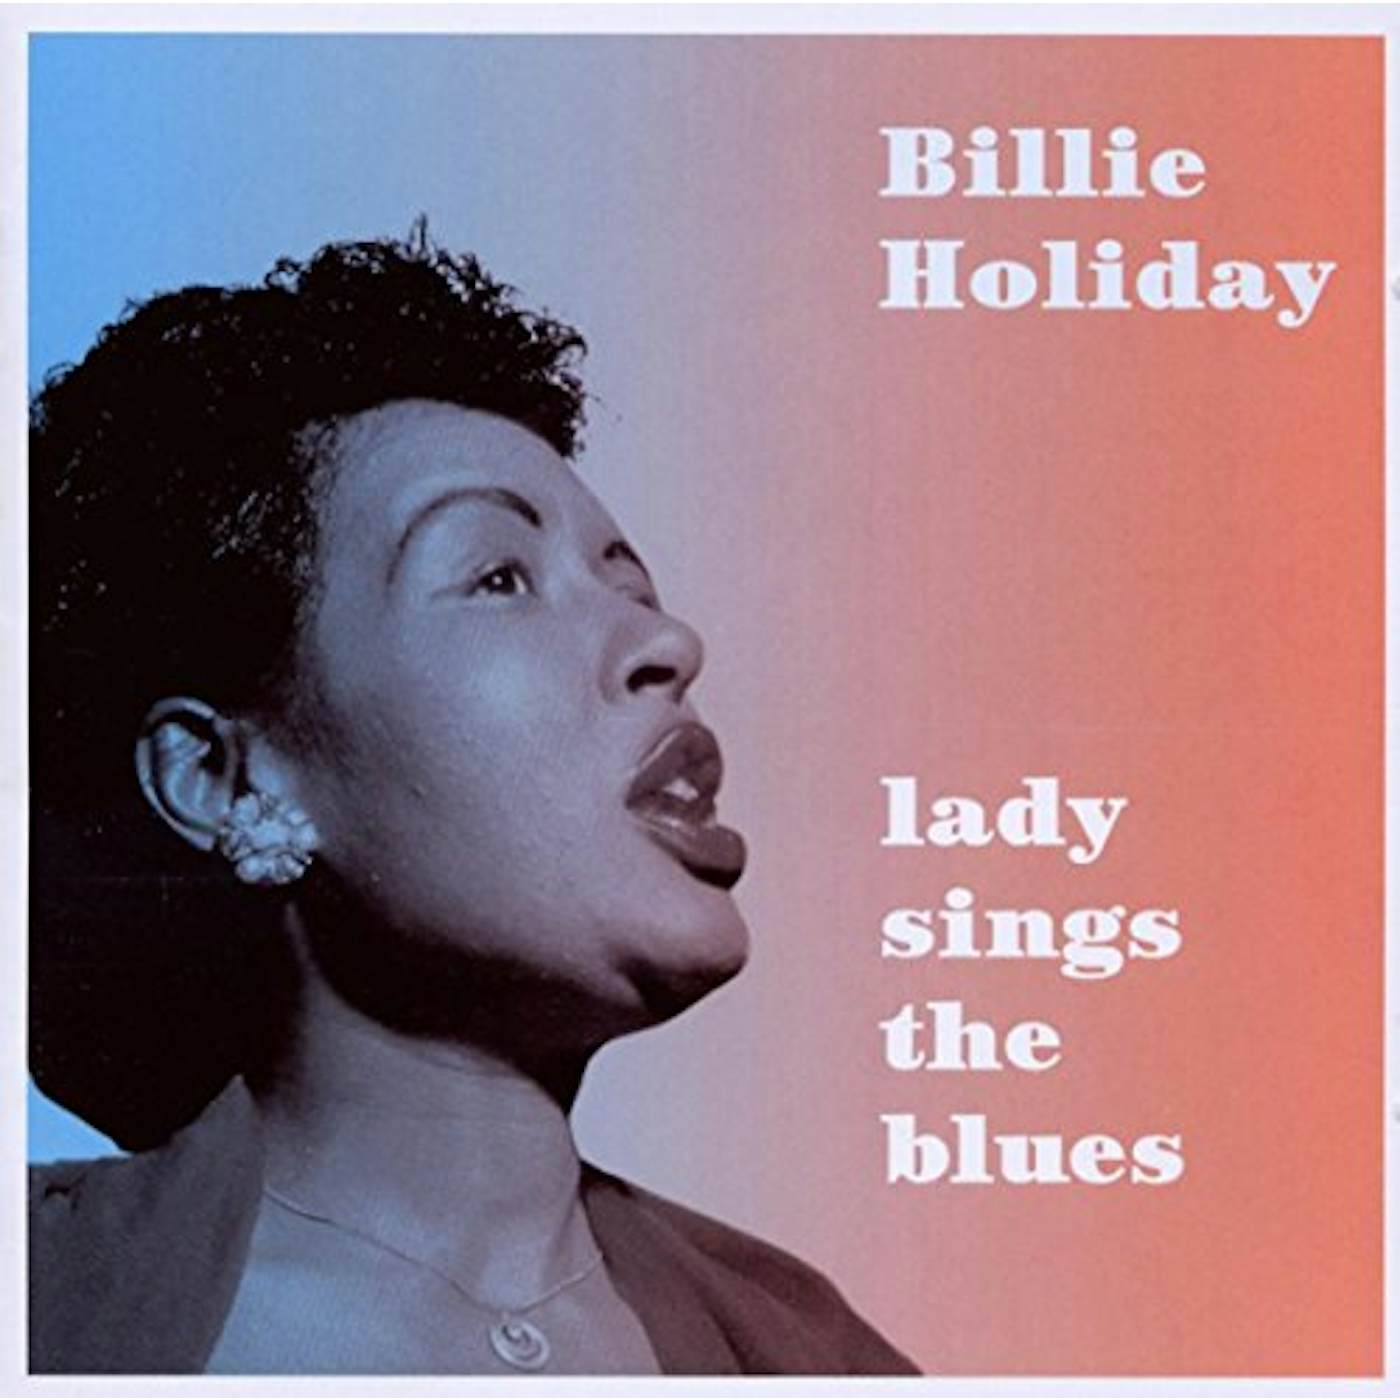 Billy Holiday Lady Sings The Blues Vinyl Record